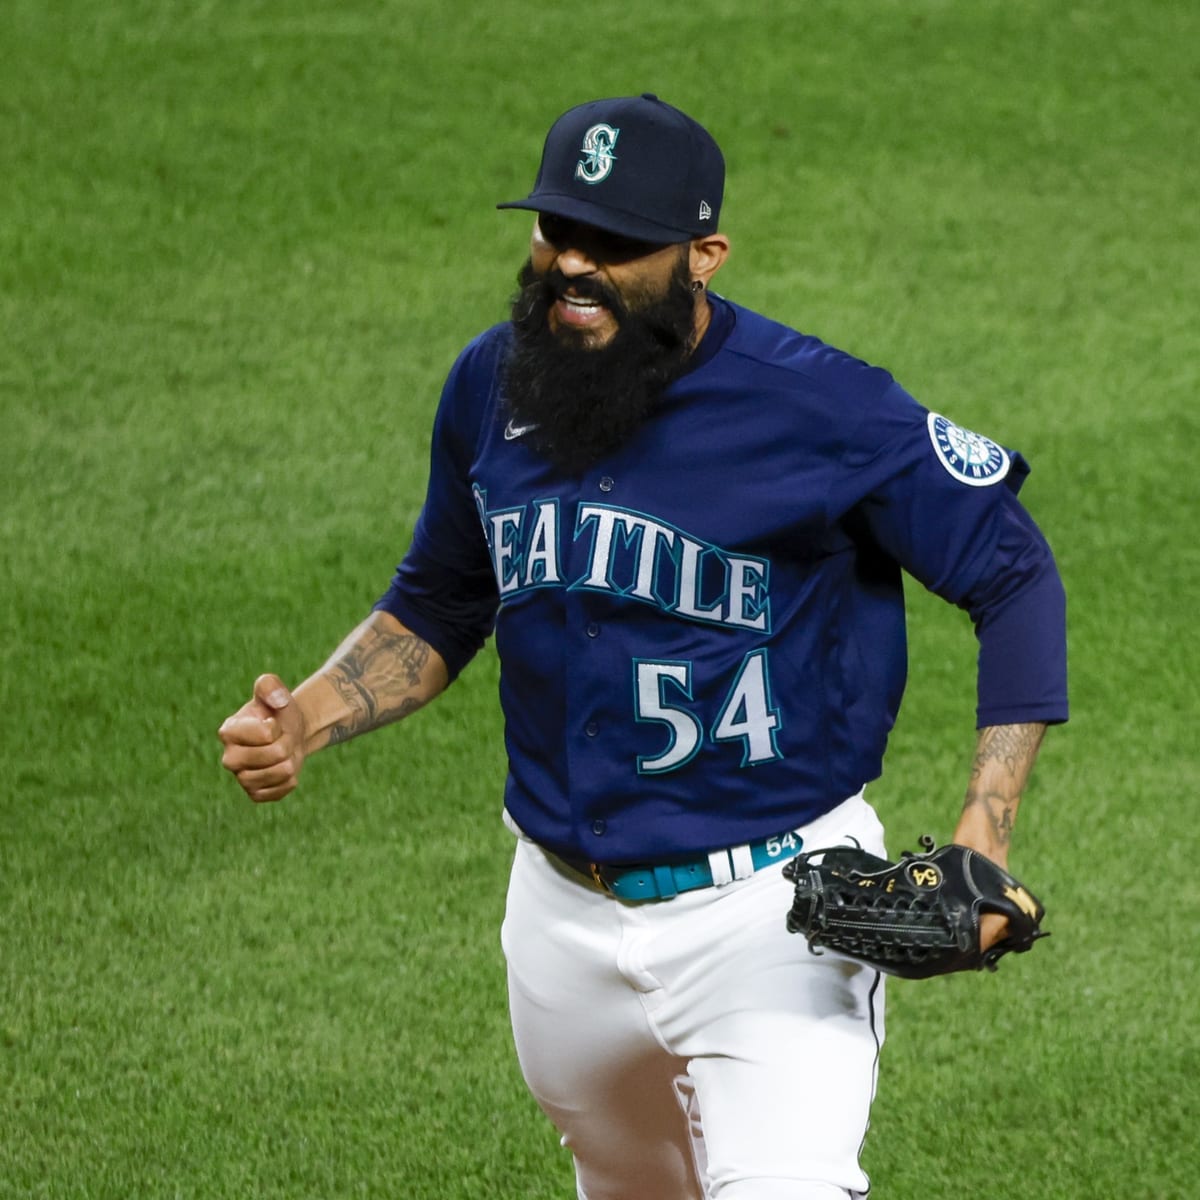 Sergio Romo - MLB Relief pitcher - News, Stats, Bio and more - The